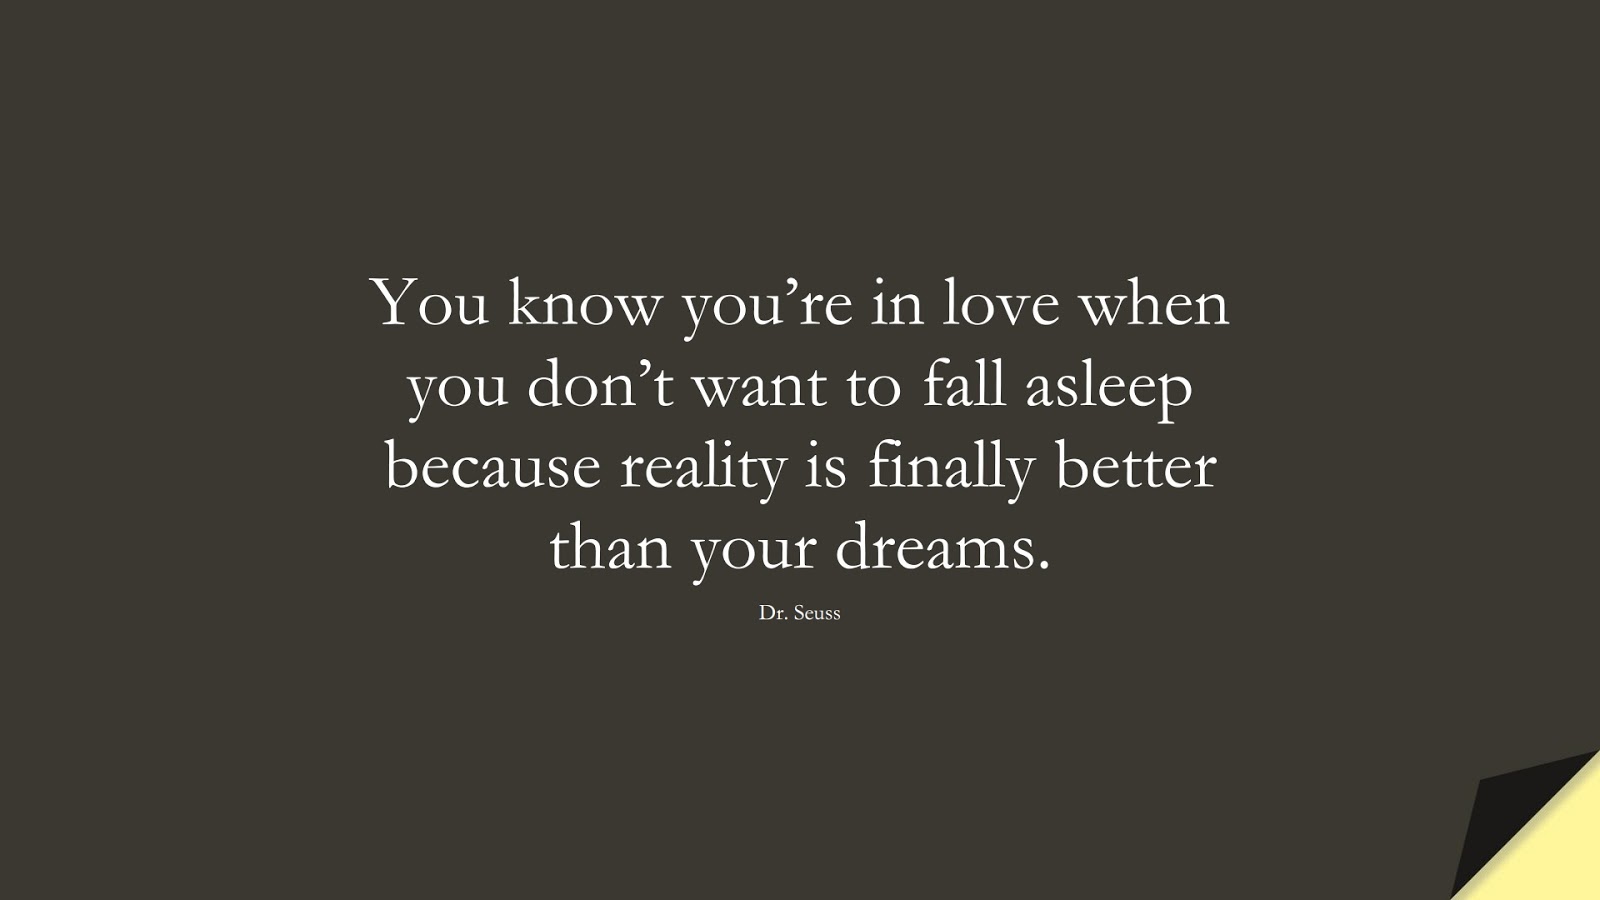 You know you’re in love when you don’t want to fall asleep because reality is finally better than your dreams. (Dr. Seuss);  #LoveQuotes